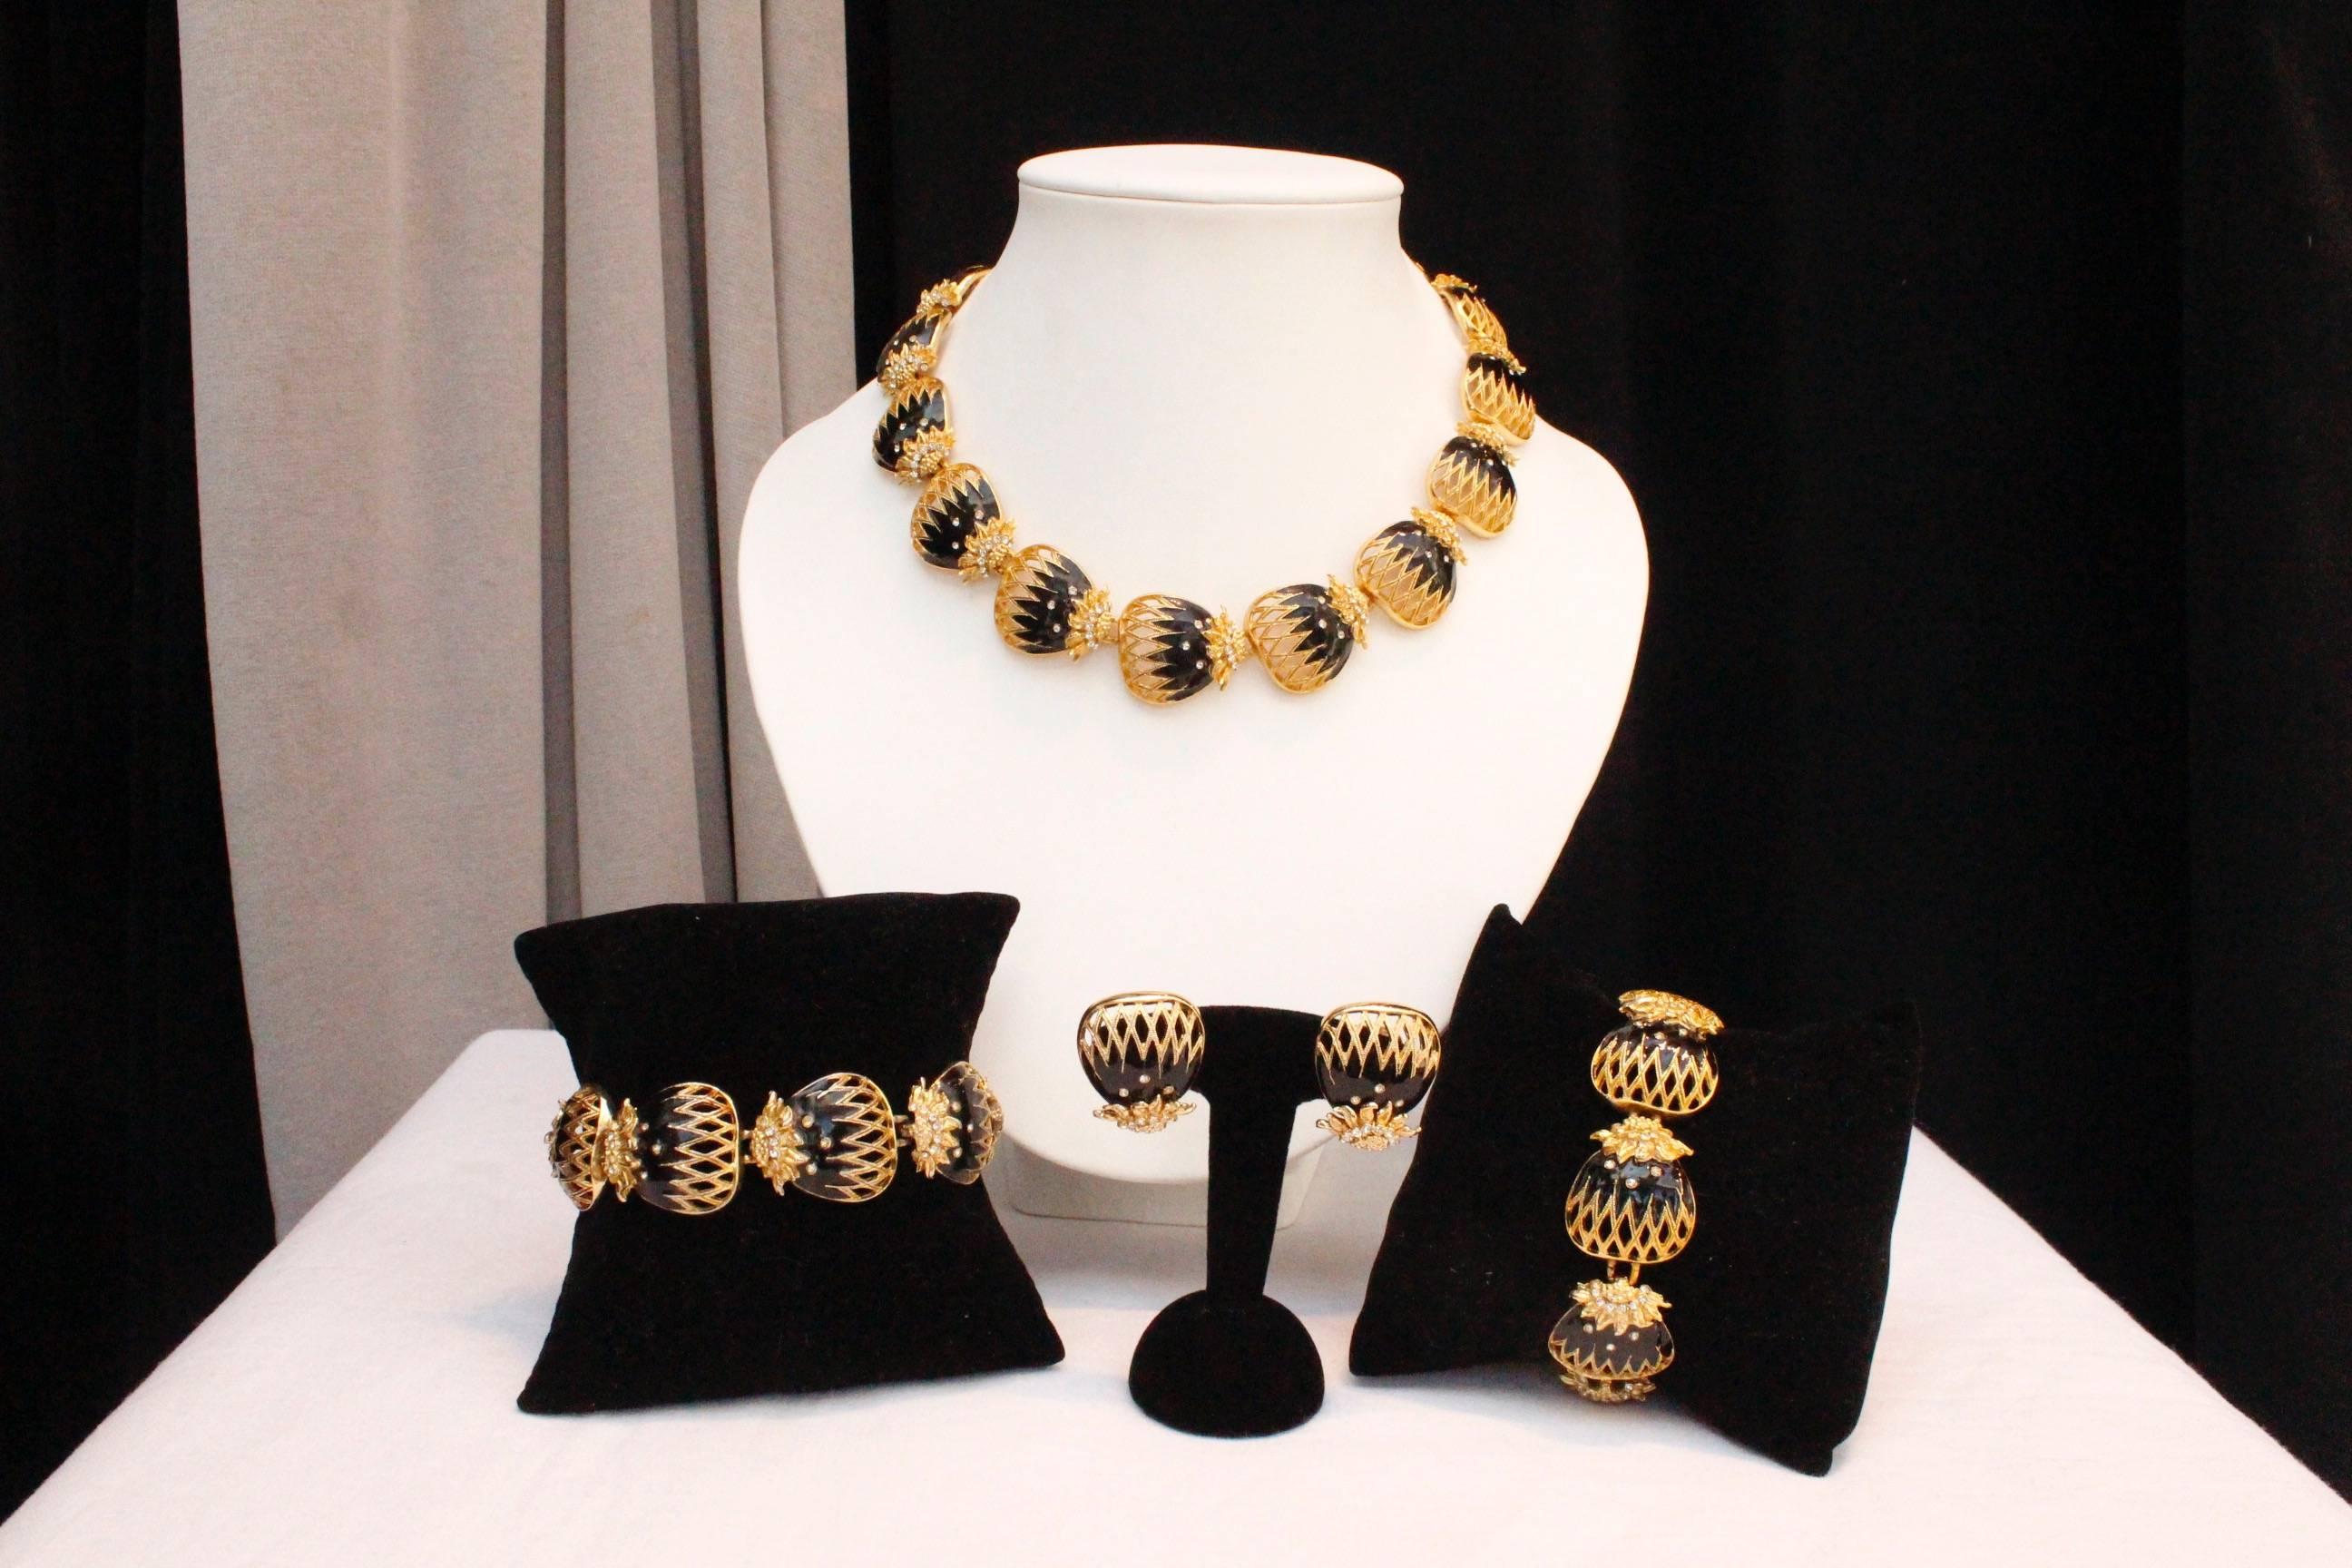 BALENCIAGA (Made in France) Gorgeous parure comprised of a pair of clip-on earrings, a bracelet and a short articulate necklace. Each piece is made of gilded metal elements with black enamel, paved with white rhinestones, representing stylized